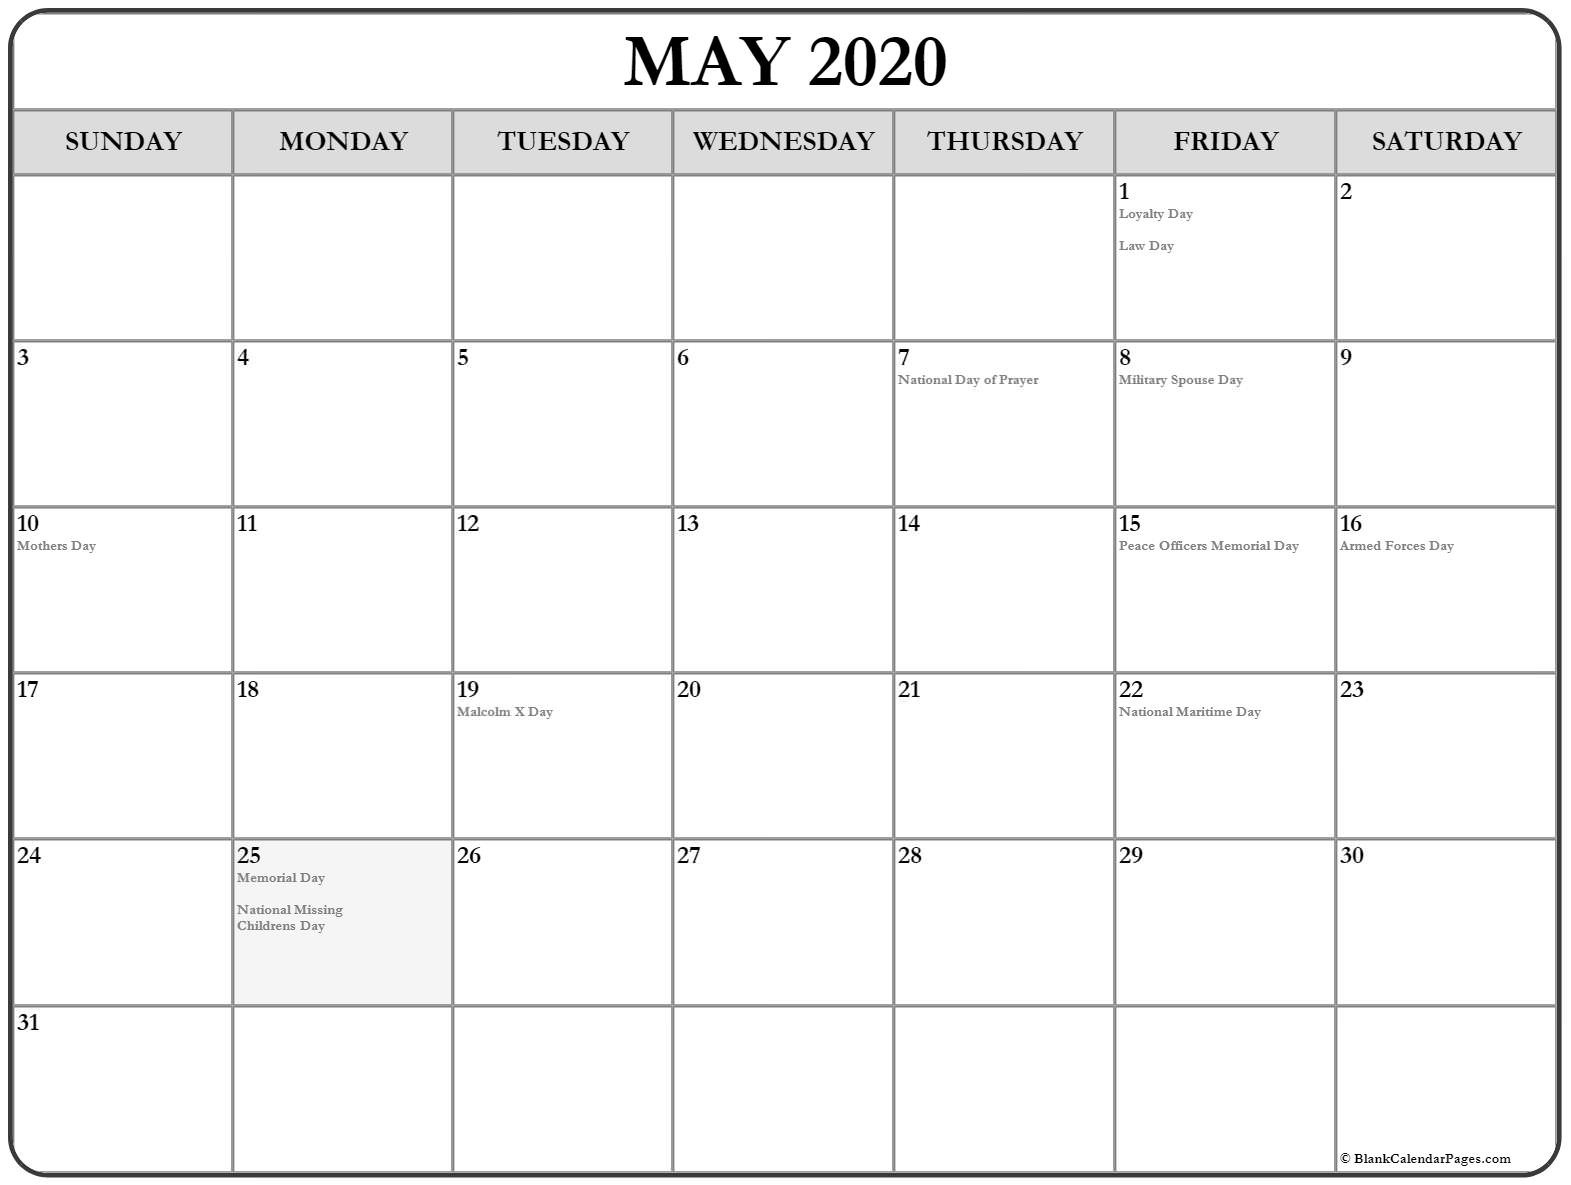 Collection Of May 2020 Calendars With Holidays-2020 May All Holidays